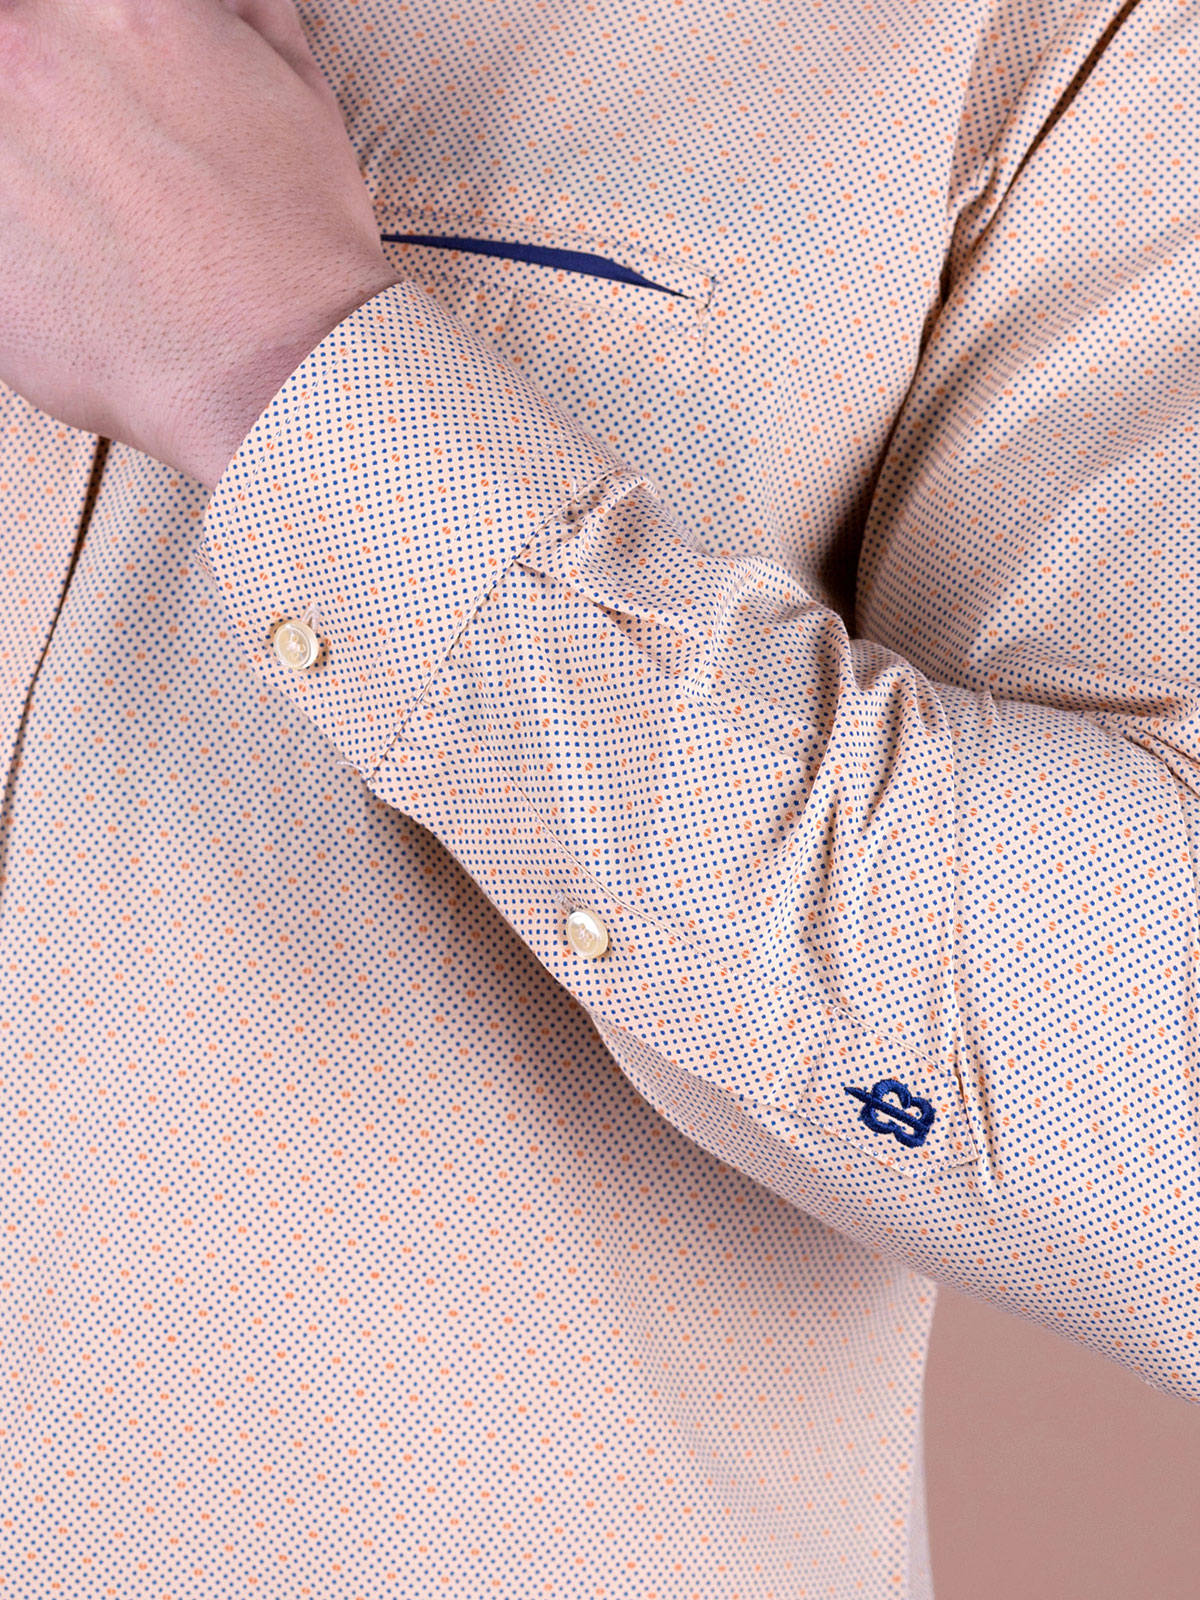 Shirt in pale orange with fine dots - 21396 € 16.31 img3